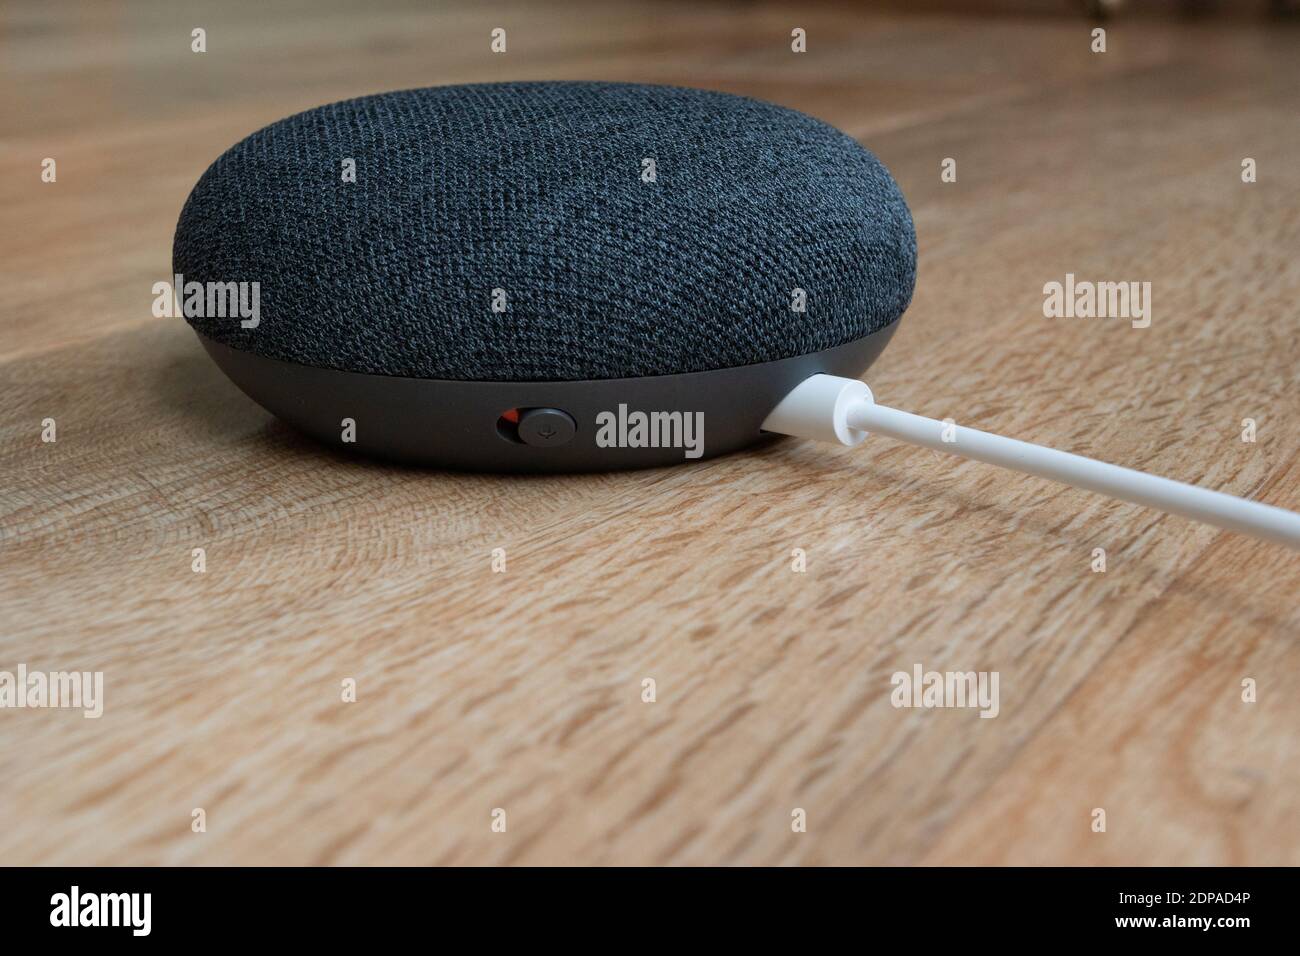 London, United Kingdom - 19 December 2020: Charcoal Google Nest Home Mini smart speaker with built-in Google Assistant on a wood table. Stock Photo